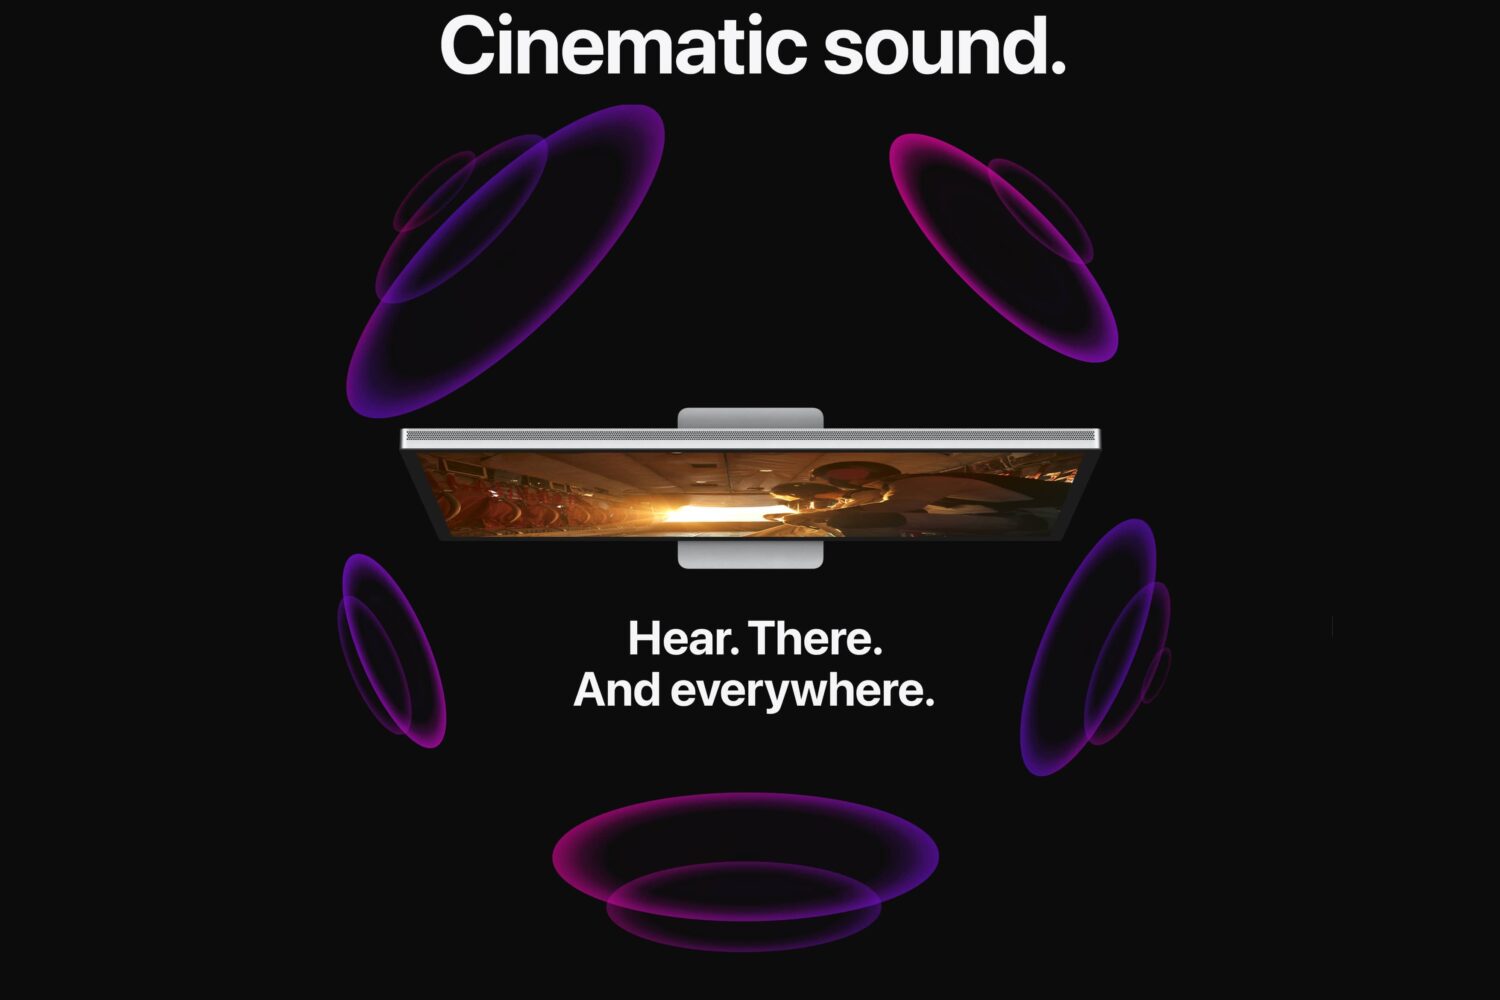 Top-down view of the Studio Display and the tagline "Hear. There. And everywhere" promoting spatial sound support